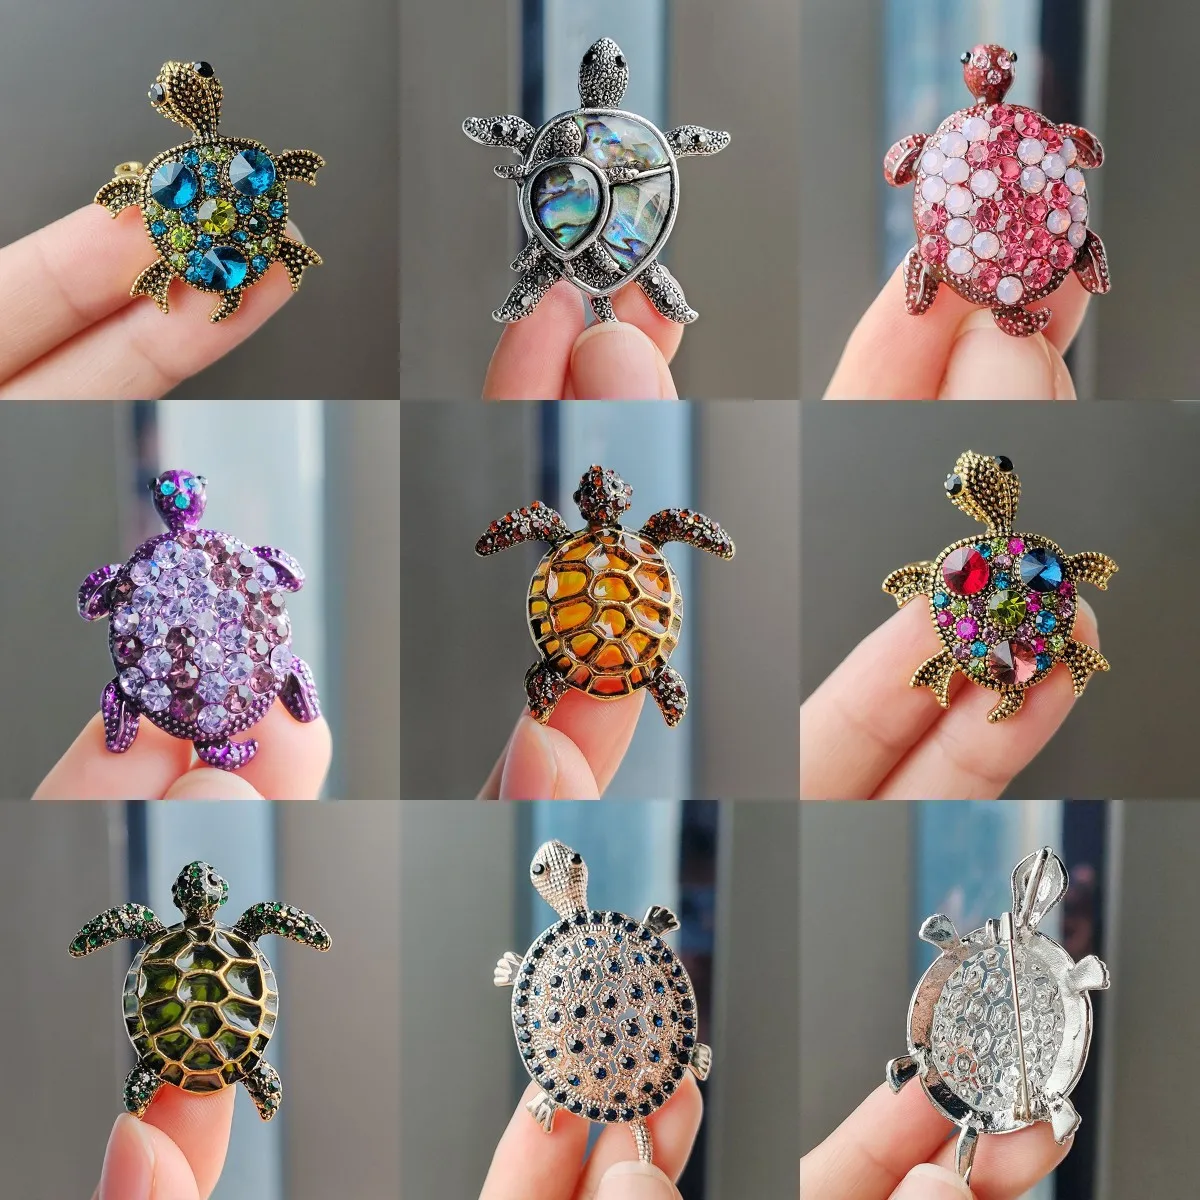 

Vintage Rhinestone Cute Cartoon Turtle Animal Brooches For Women Men Coat Clothing Accessories Brooch Pins Party Jewelry Gifts